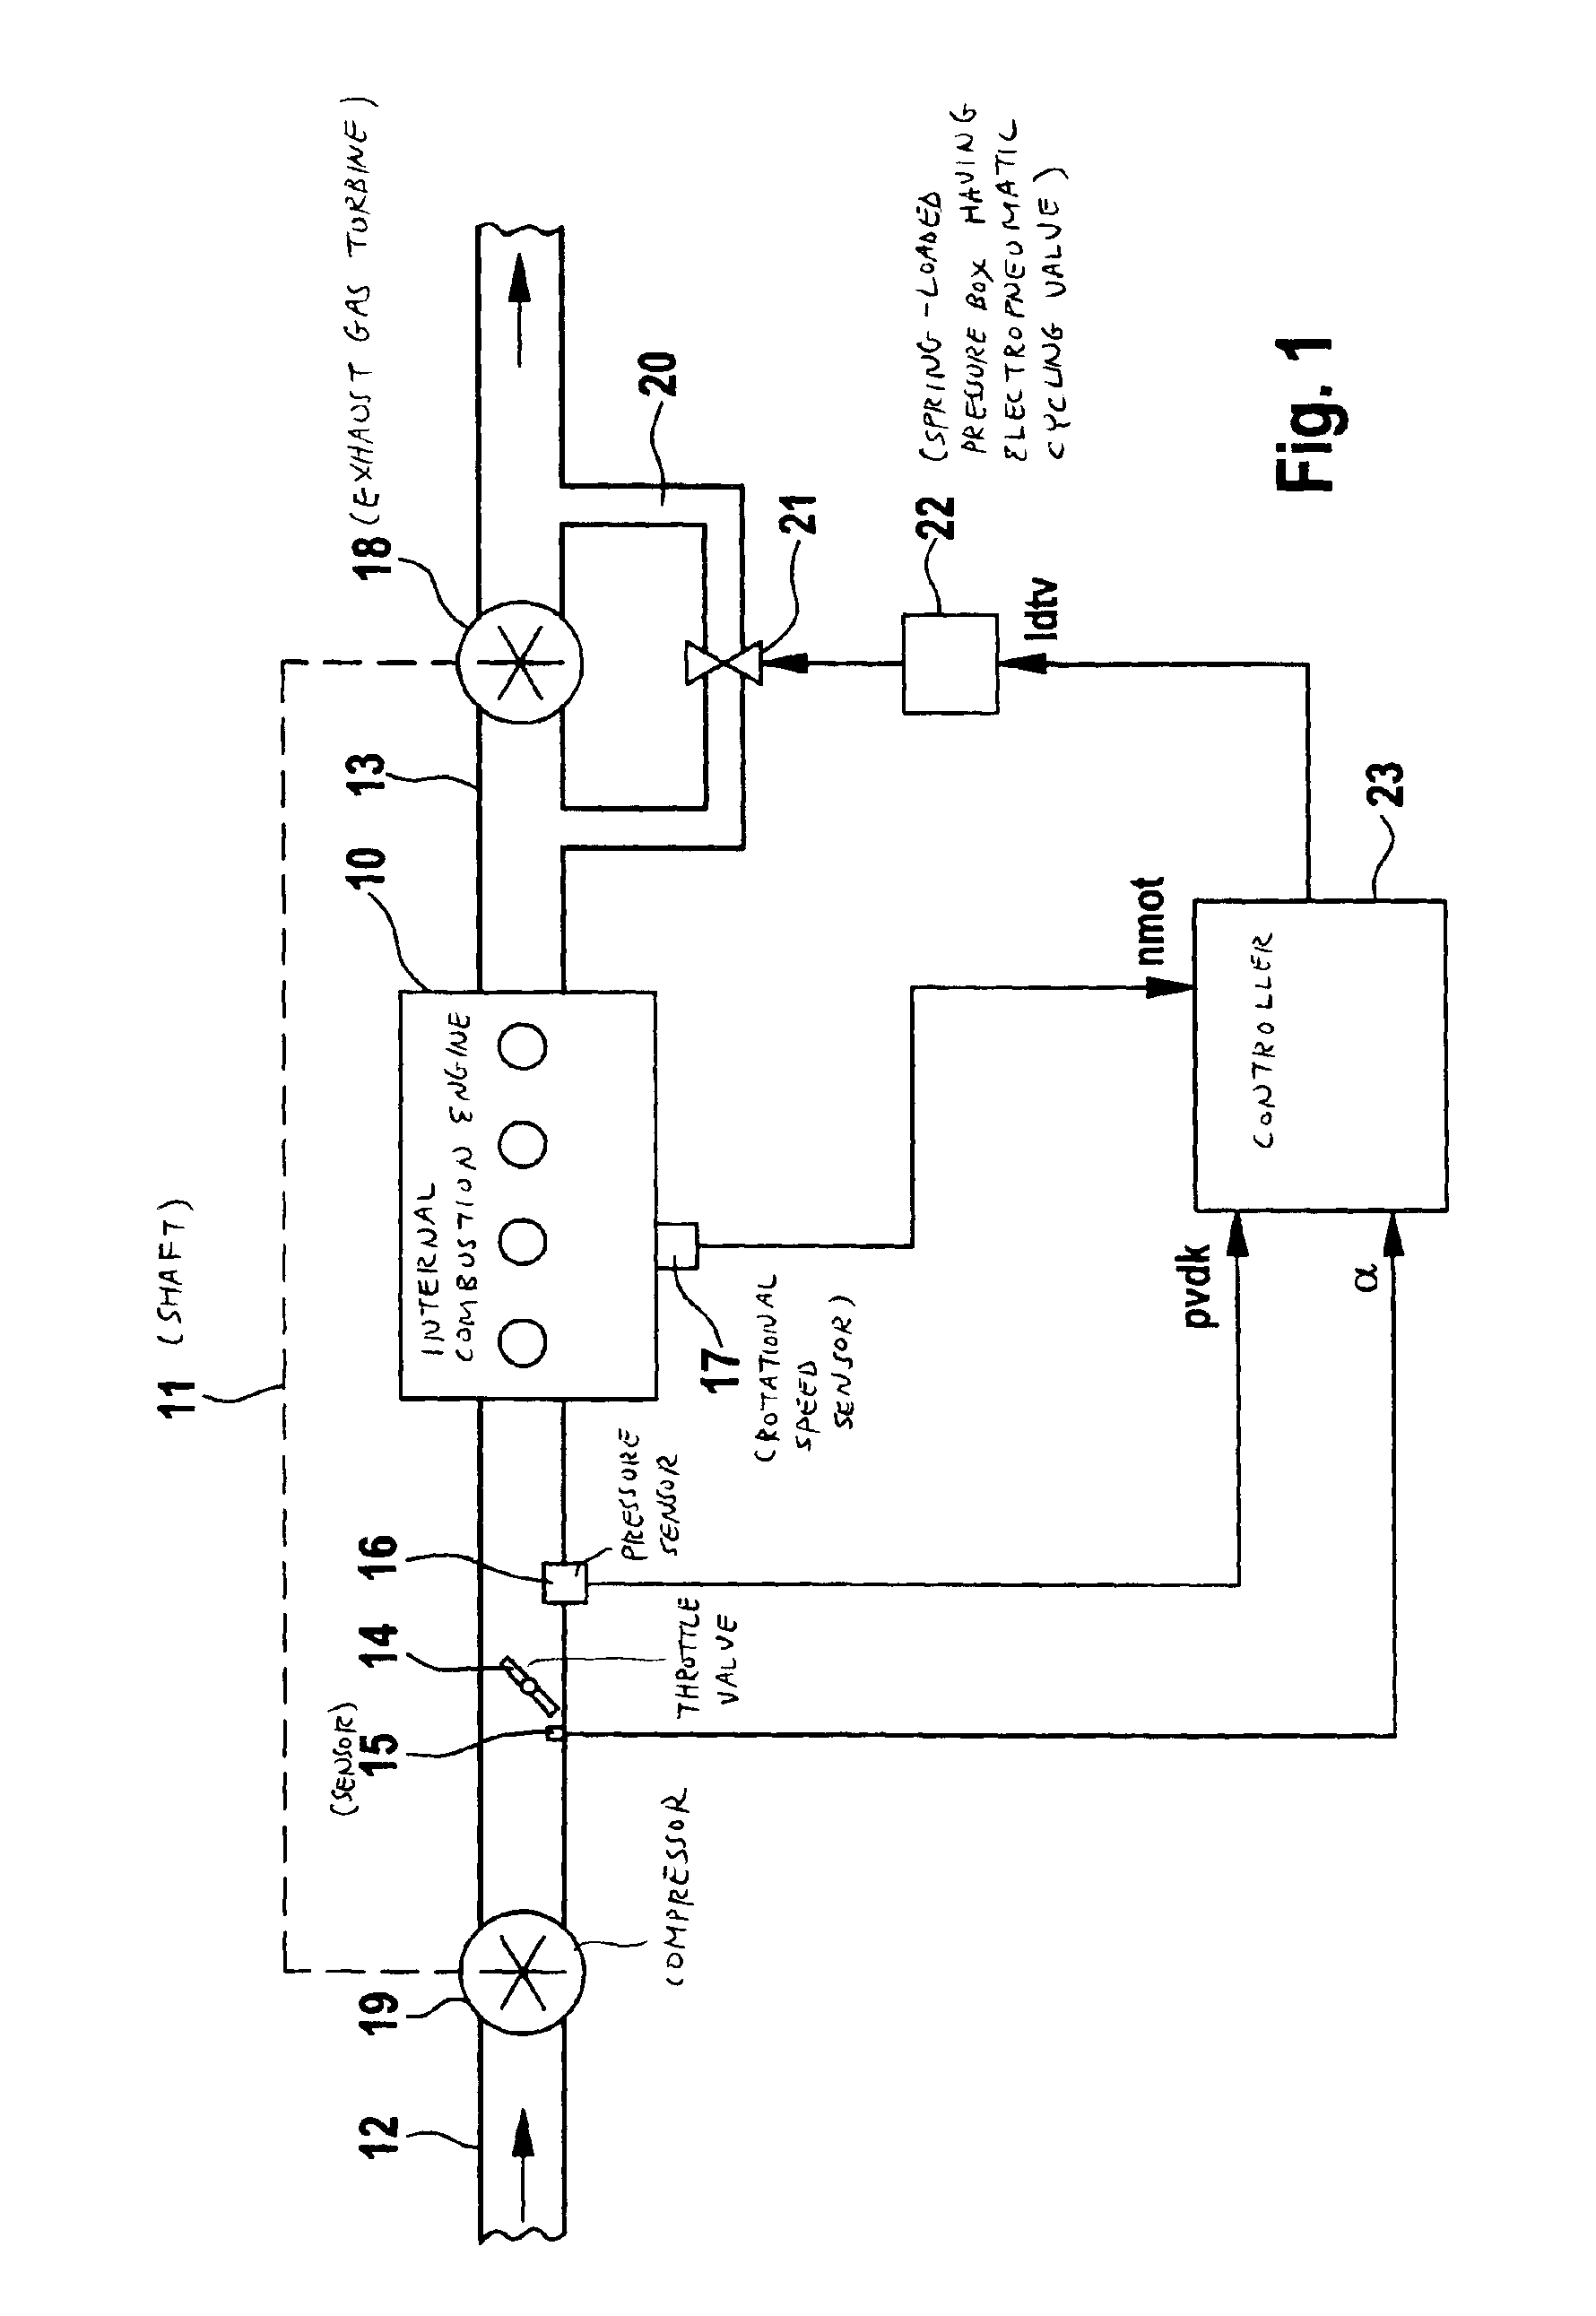 Method for regulating the supercharging of an internal combustion engine